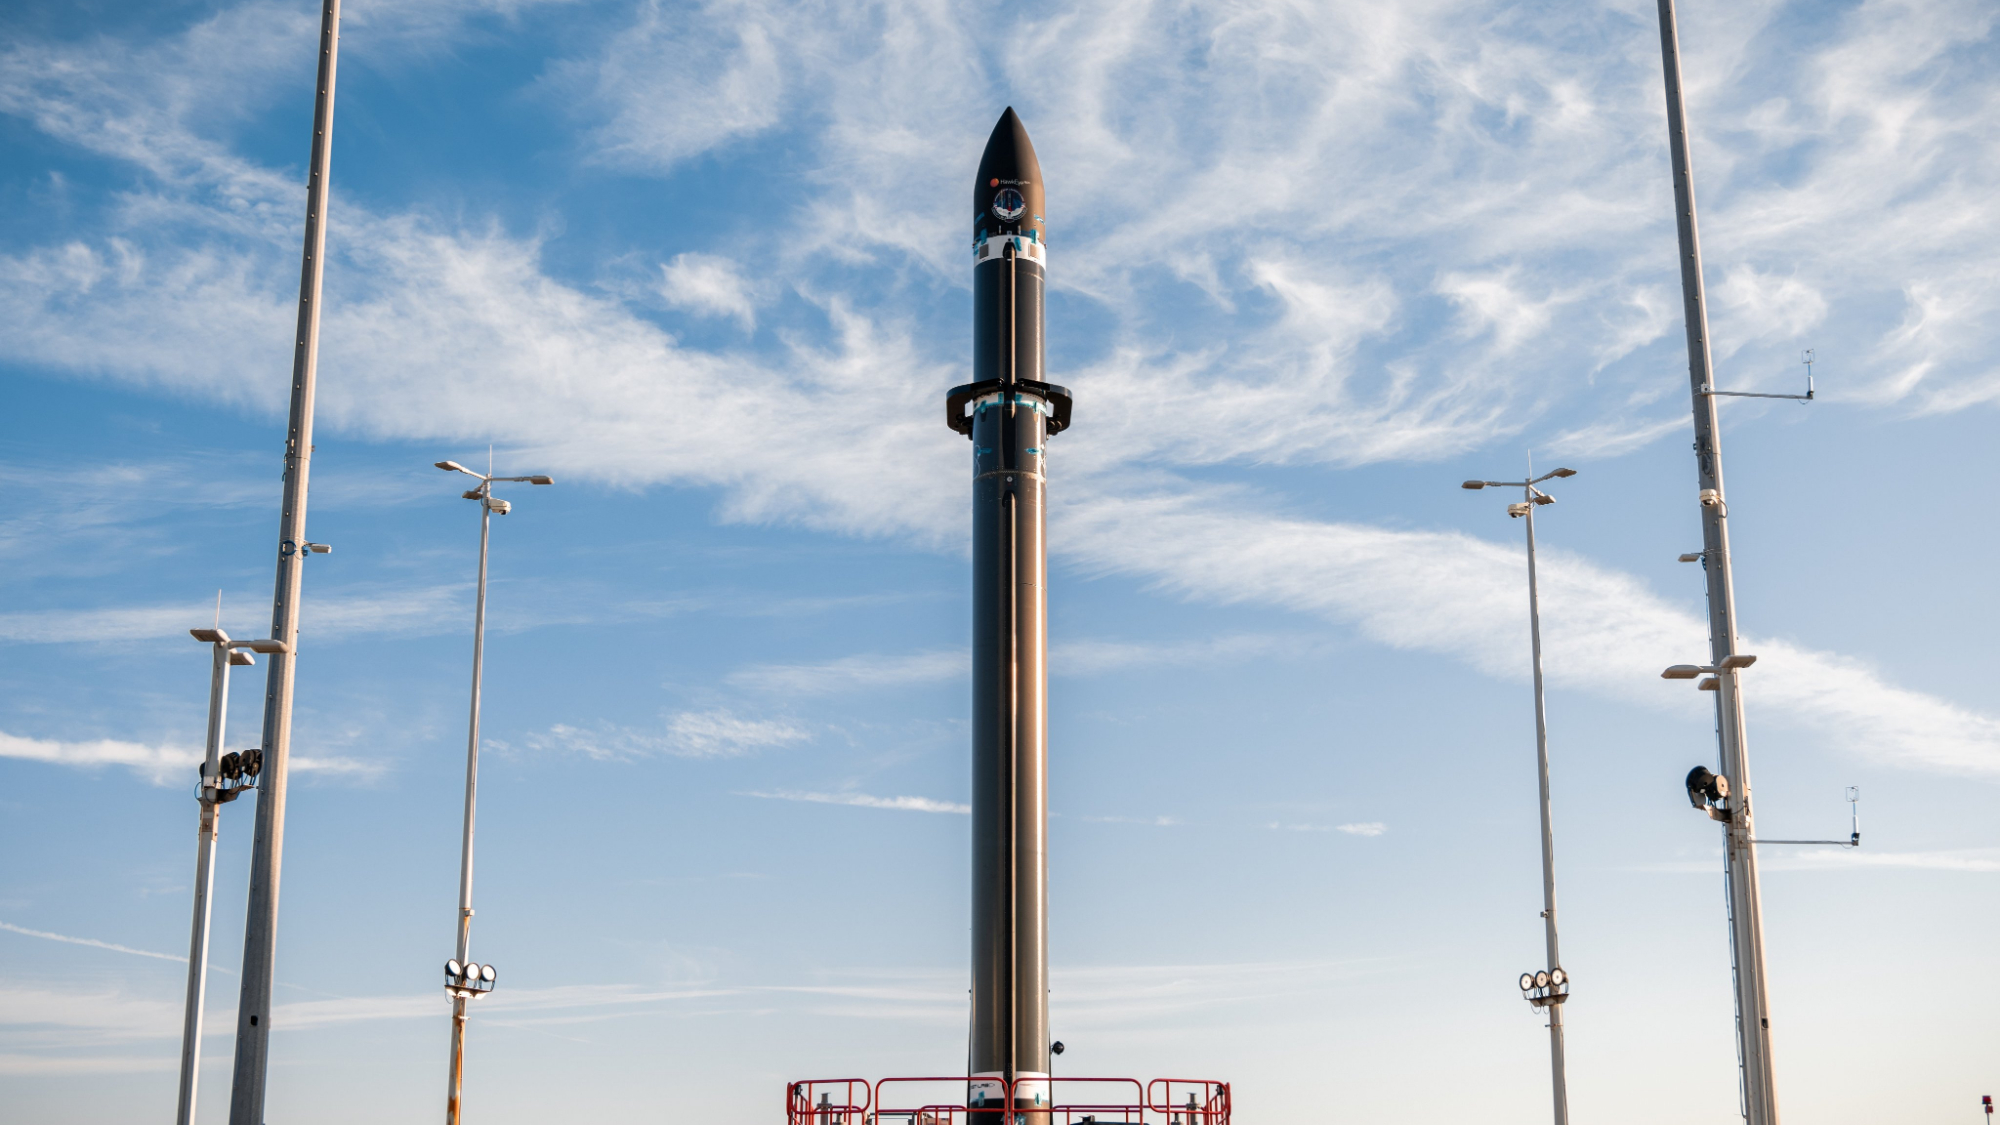  Rocket Lab now aims to launch 1st Electron booster from US soil on Dec. 13 